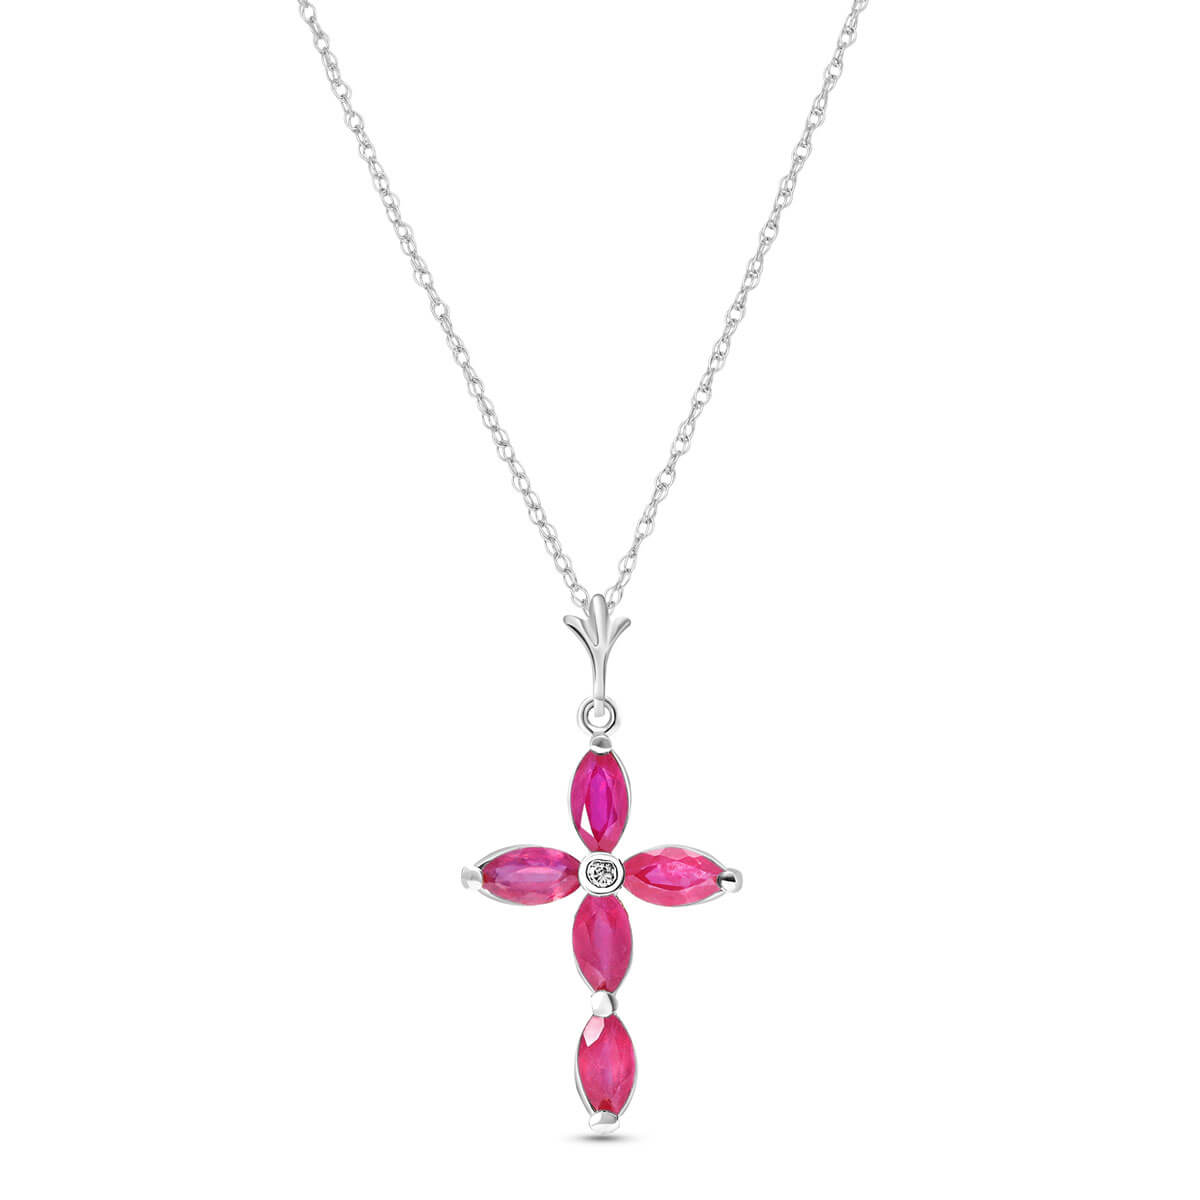 Ruby & Diamond Vatican Cross Pendant Necklace in 9ct White Gold